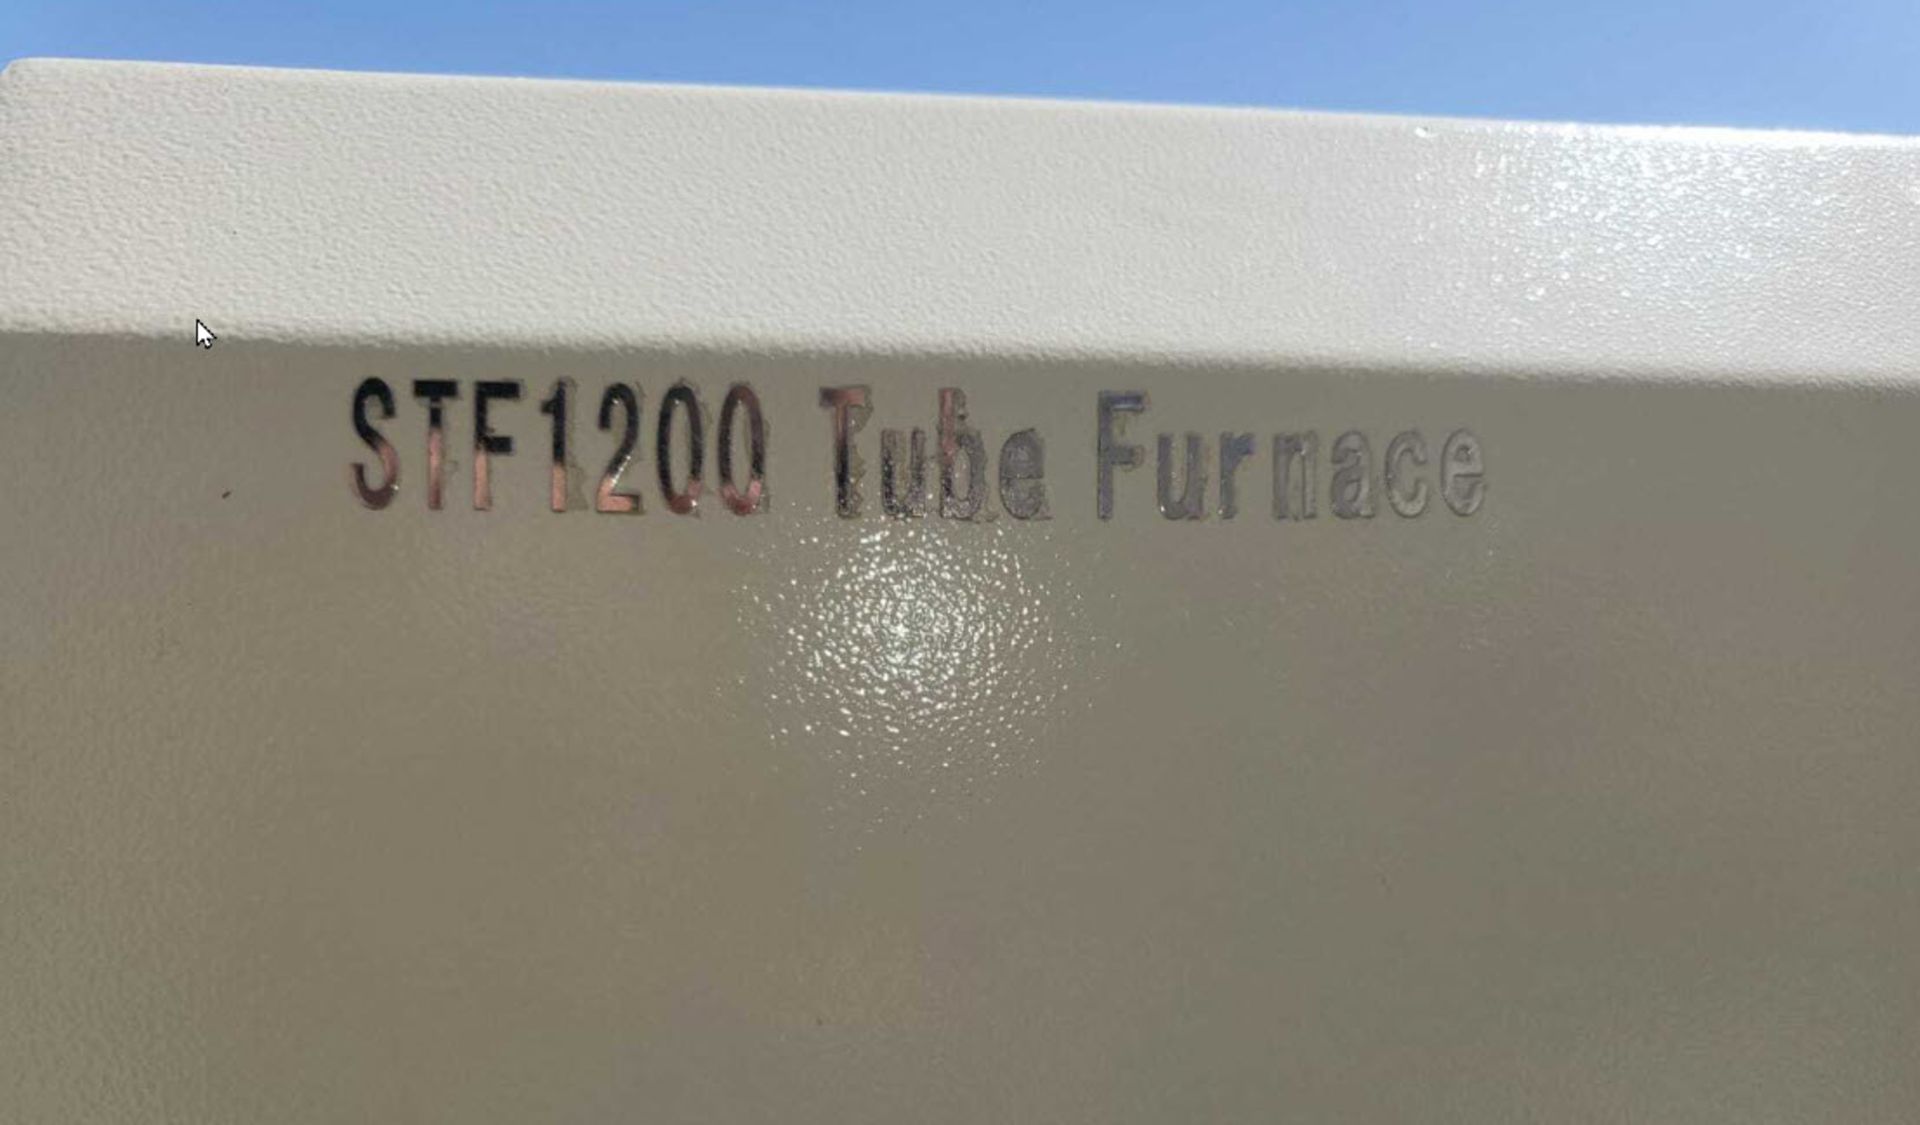 (Located in Hollister, CA) Across International STF1200 Tube Furnace, Rigging Fee: $100 - Image 7 of 10